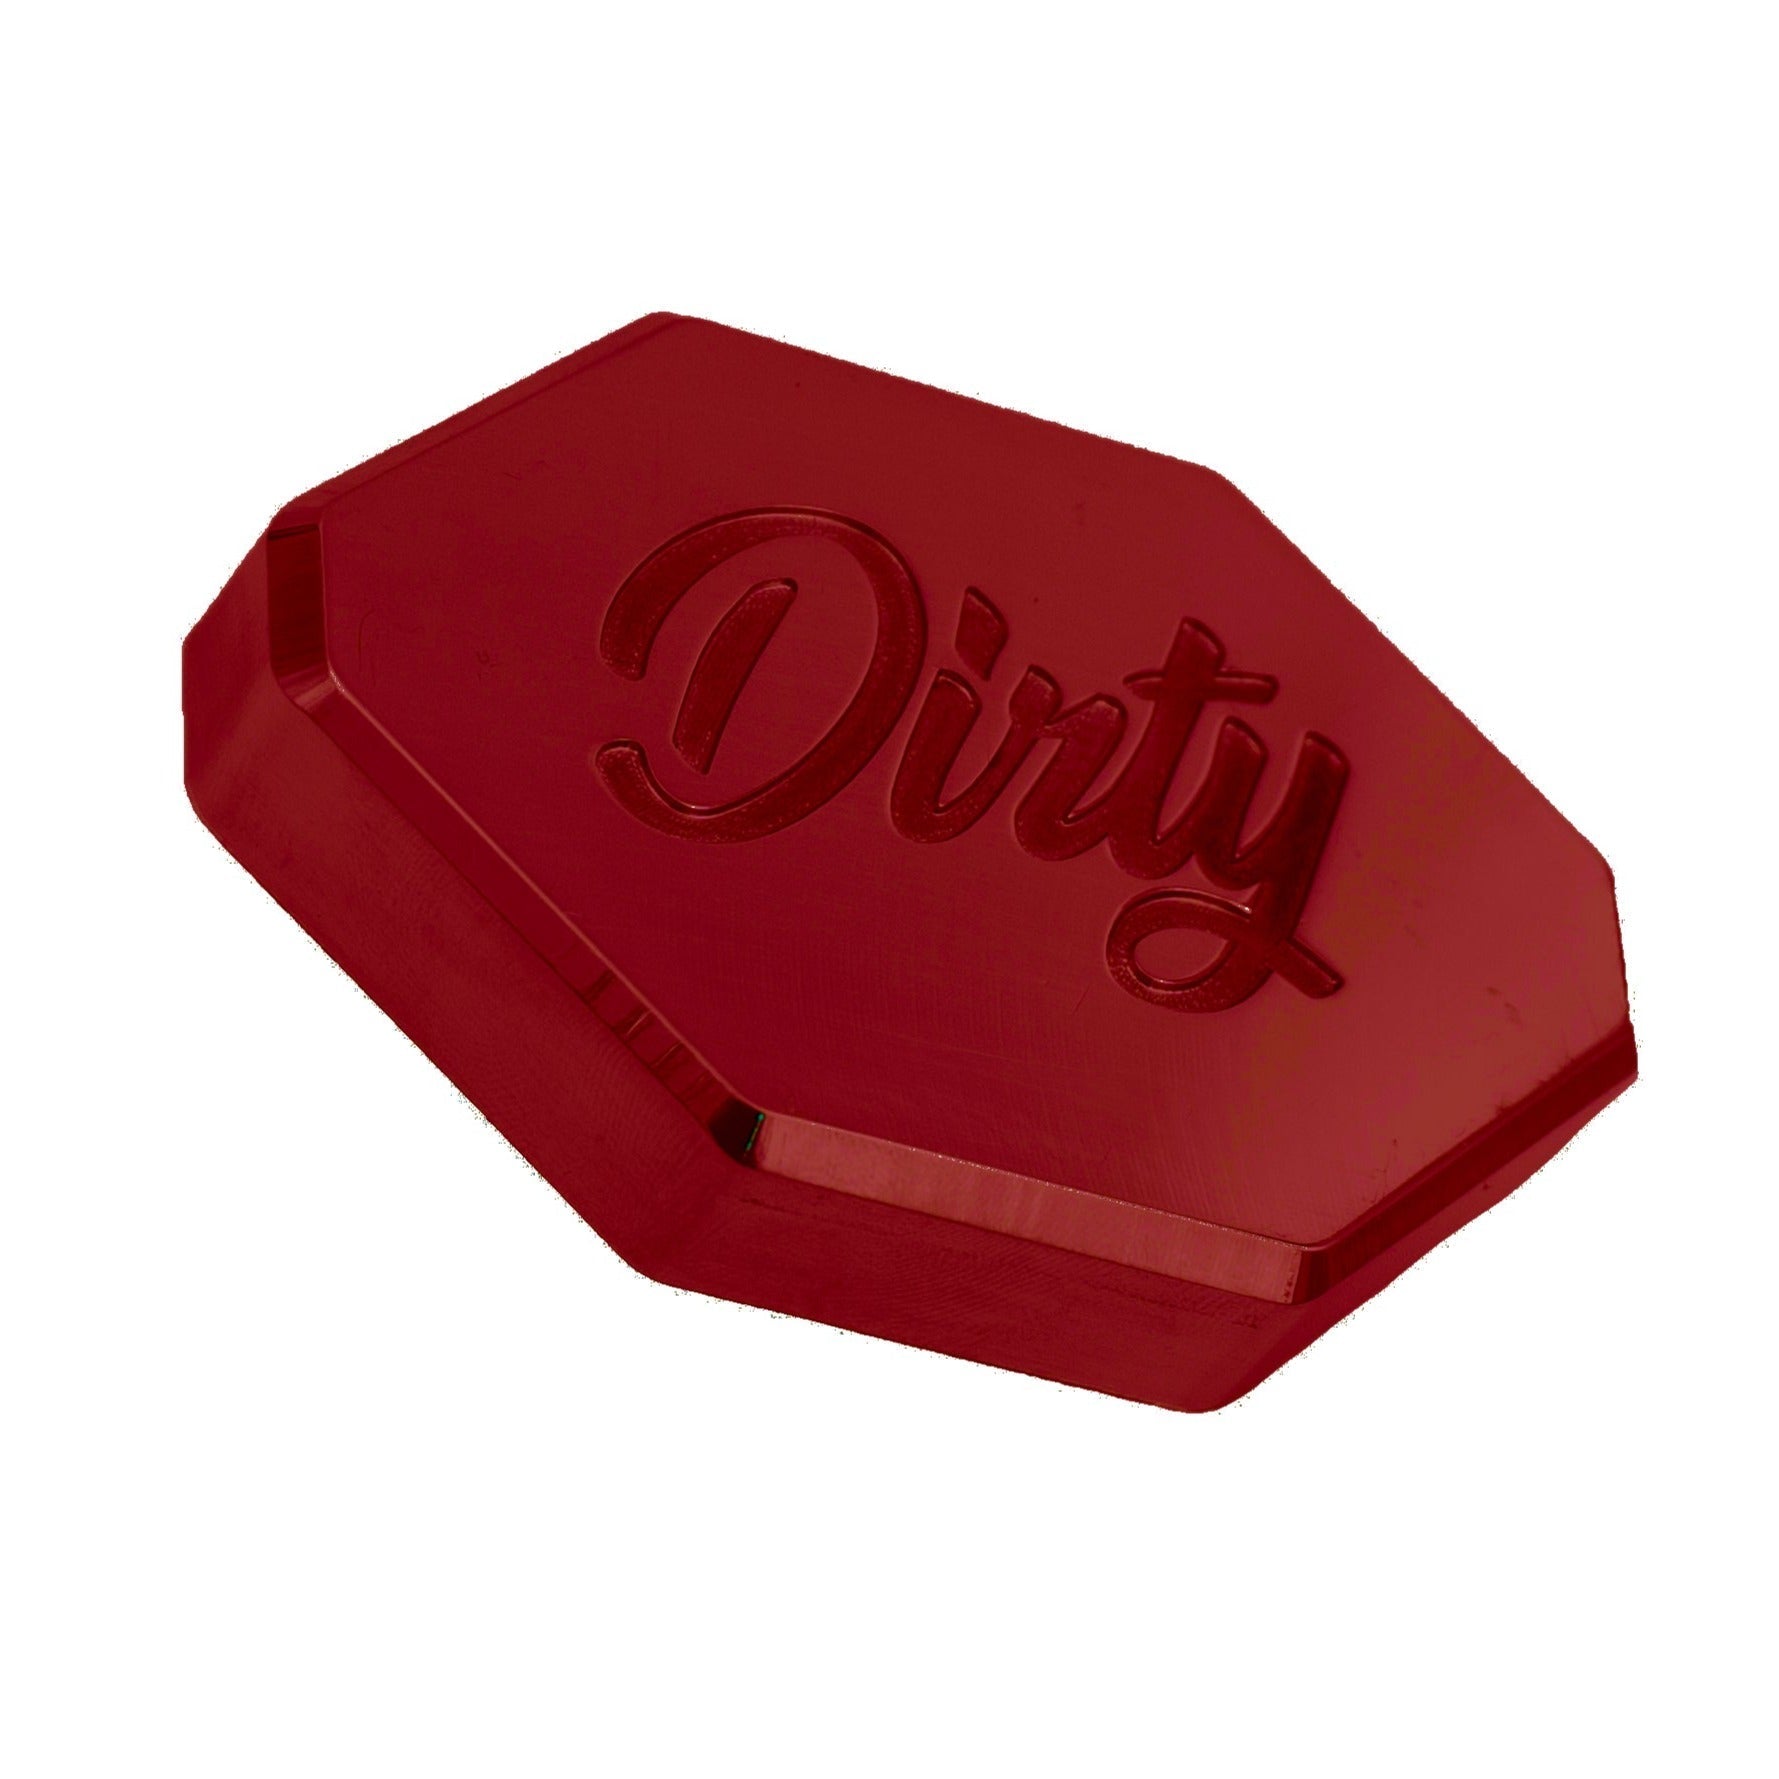 2020-2022 Powerstroke Small Coolant Reservoir Improved Aesthetics Cap (067-ENG-0373)-Engine Caps-Dirty Diesel Customs-067-ENG-0373-RED-Dirty Diesel Customs